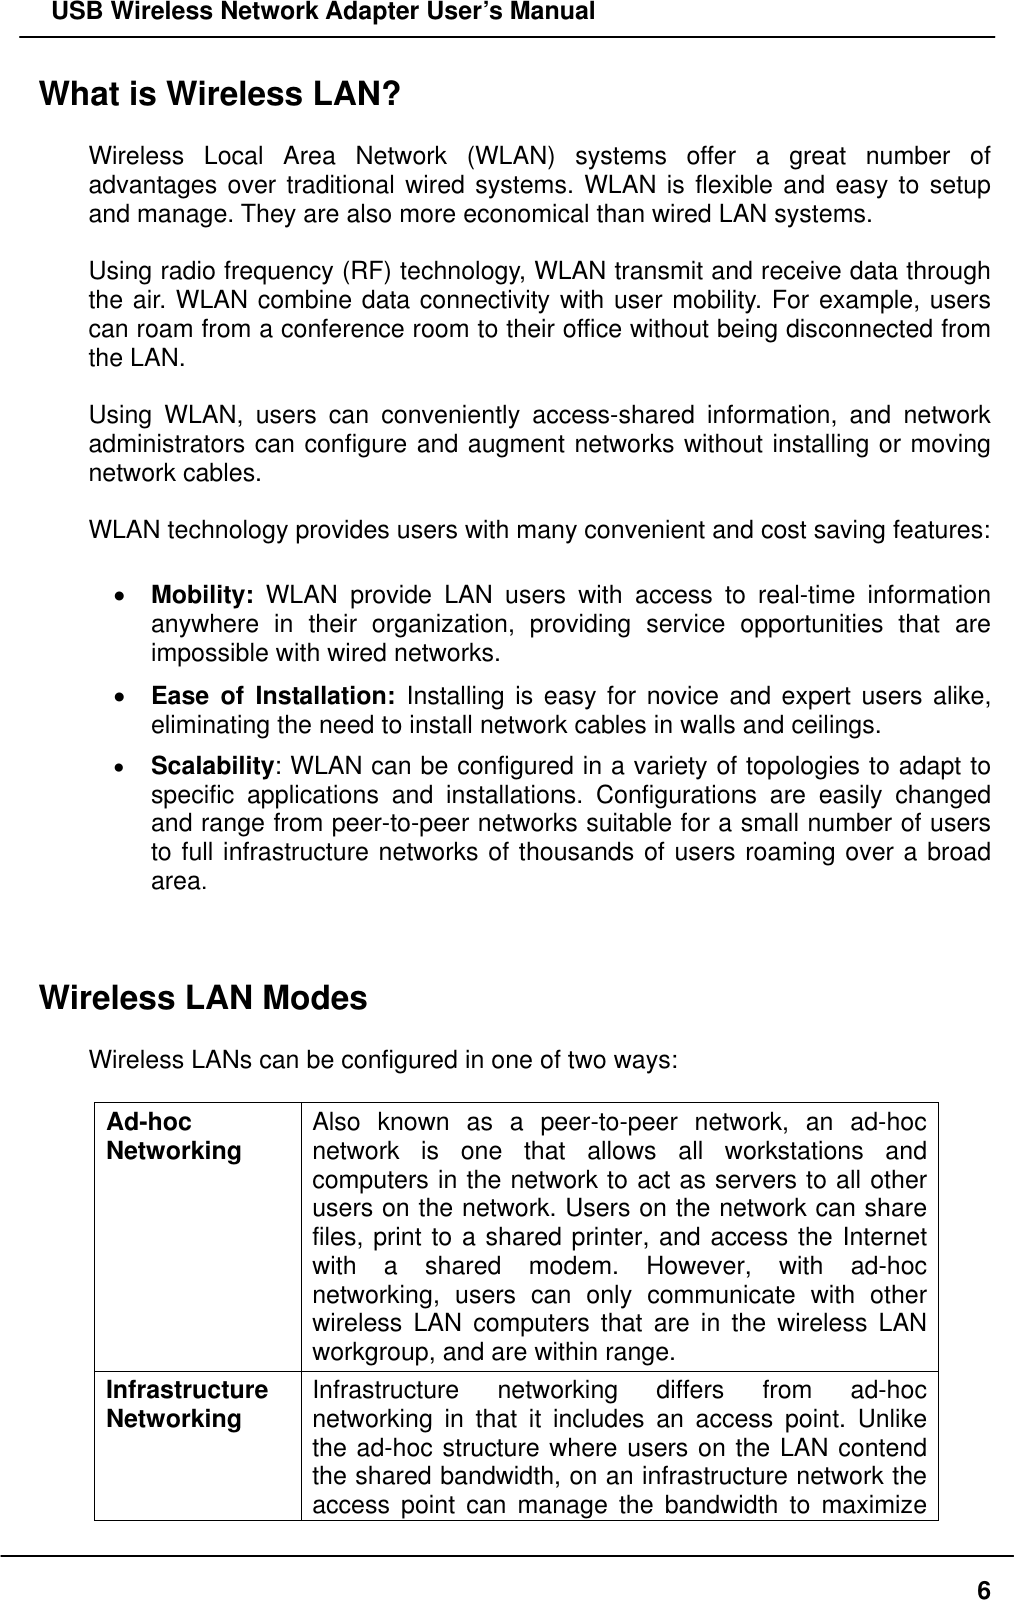   USB Wireless Network Adapter User’s Manual What is Wireless LAN?  Wireless Local Area Network (WLAN) systems offer a great number of advantages over traditional wired systems. WLAN is flexible and easy to setup and manage. They are also more economical than wired LAN systems.  Using radio frequency (RF) technology, WLAN transmit and receive data through the air. WLAN combine data connectivity with user mobility. For example, users can roam from a conference room to their office without being disconnected from the LAN.  Using WLAN, users can conveniently access-shared information, and network administrators can configure and augment networks without installing or moving network cables.  WLAN technology provides users with many convenient and cost saving features:  •  Mobility: WLAN provide LAN users with access to real-time information anywhere in their organization, providing service opportunities that are impossible with wired networks. •  Ease of Installation: Installing is easy for novice and expert users alike, eliminating the need to install network cables in walls and ceilings.   •  Scalability: WLAN can be configured in a variety of topologies to adapt to specific applications and installations. Configurations are easily changed and range from peer-to-peer networks suitable for a small number of users to full infrastructure networks of thousands of users roaming over a broad area.   Wireless LAN Modes  Wireless LANs can be configured in one of two ways:  Ad-hoc  Networking  Also known as a peer-to-peer network, an ad-hoc network is one that allows all workstations and computers in the network to act as servers to all other users on the network. Users on the network can share files, print to a shared printer, and access the Internet with a shared modem. However, with ad-hoc networking, users can only communicate with other wireless LAN computers that are in the wireless LAN workgroup, and are within range. Infrastructure Networking  Infrastructure networking differs from ad-hoc networking in that it includes an access point. Unlike the ad-hoc structure where users on the LAN contend the shared bandwidth, on an infrastructure network the access point can manage the bandwidth to maximize  6